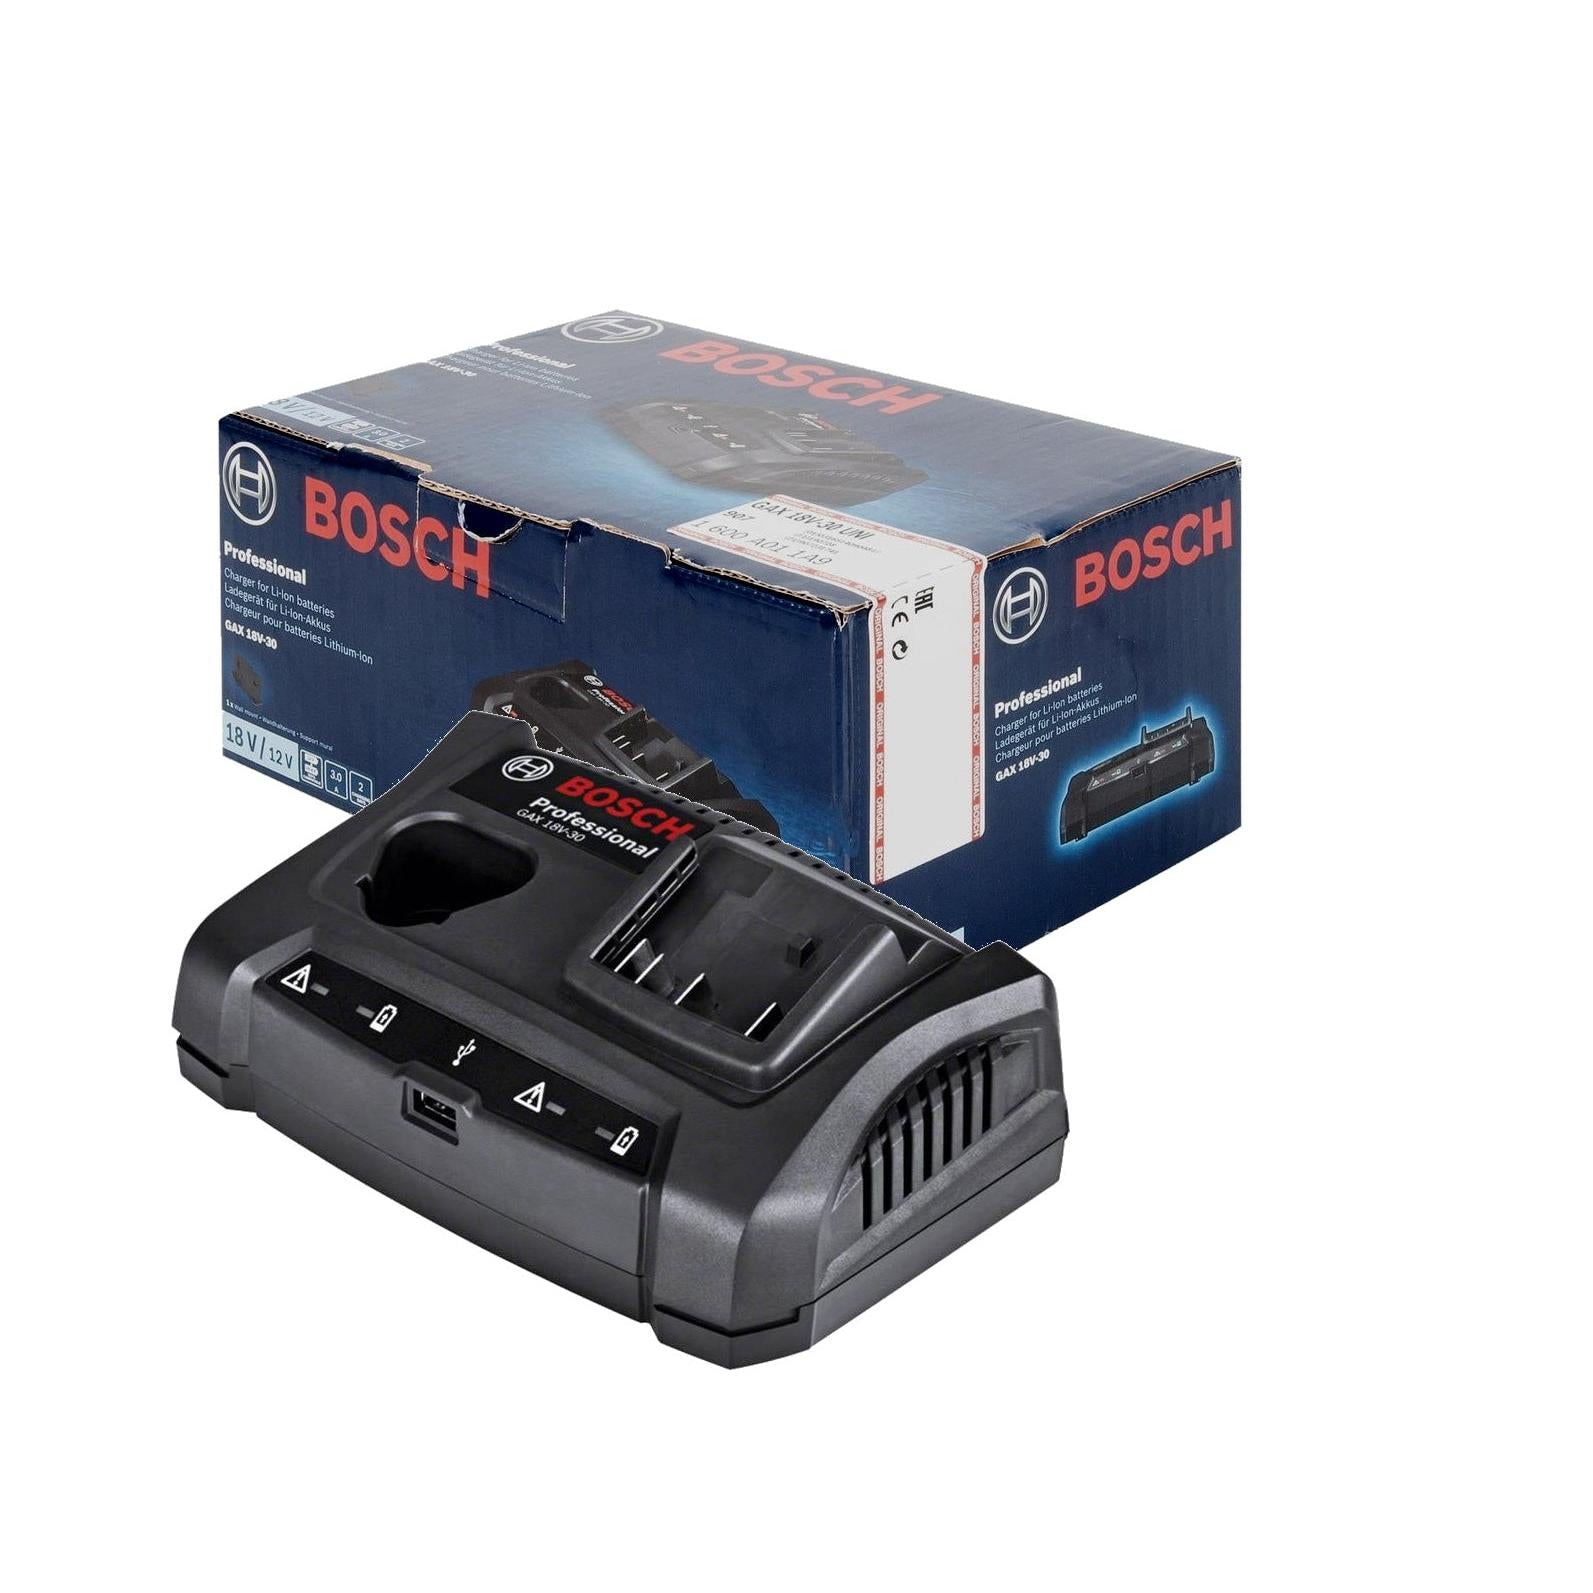 Bosch Professional Charger Gax 18V-30 1600A011A9 Power Tool Services